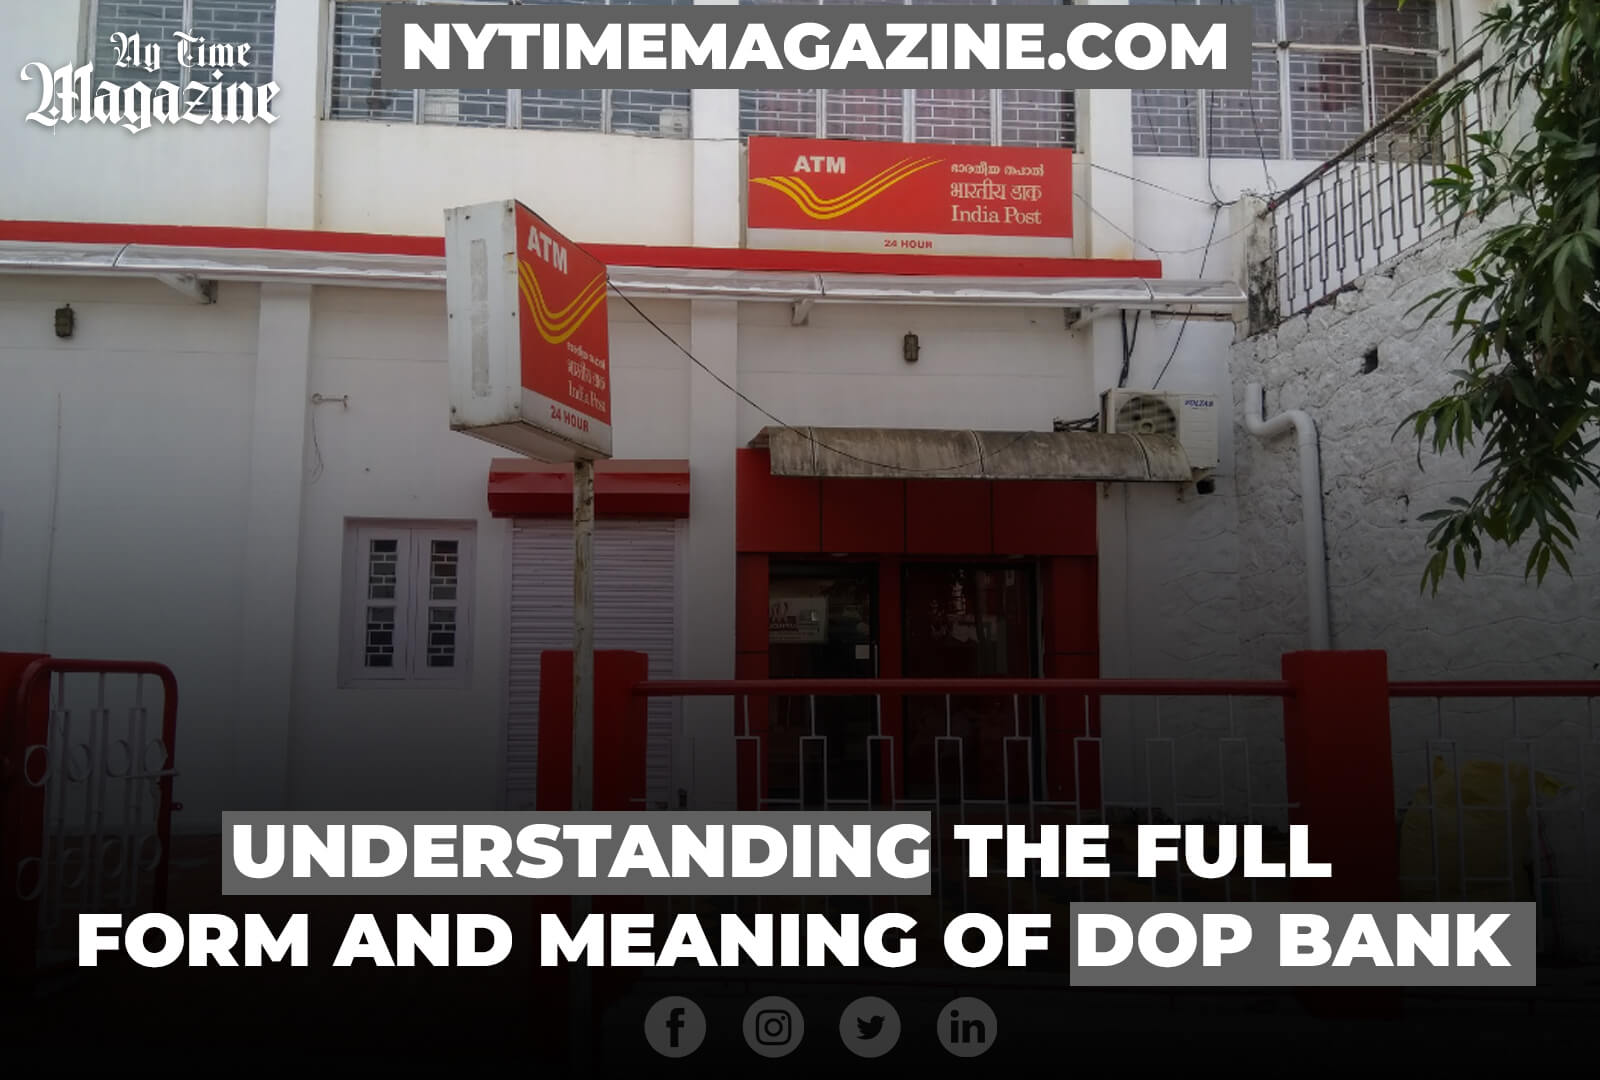 UNDERSTANDING THE FULL FORM AND MEANING OF DOP BANK